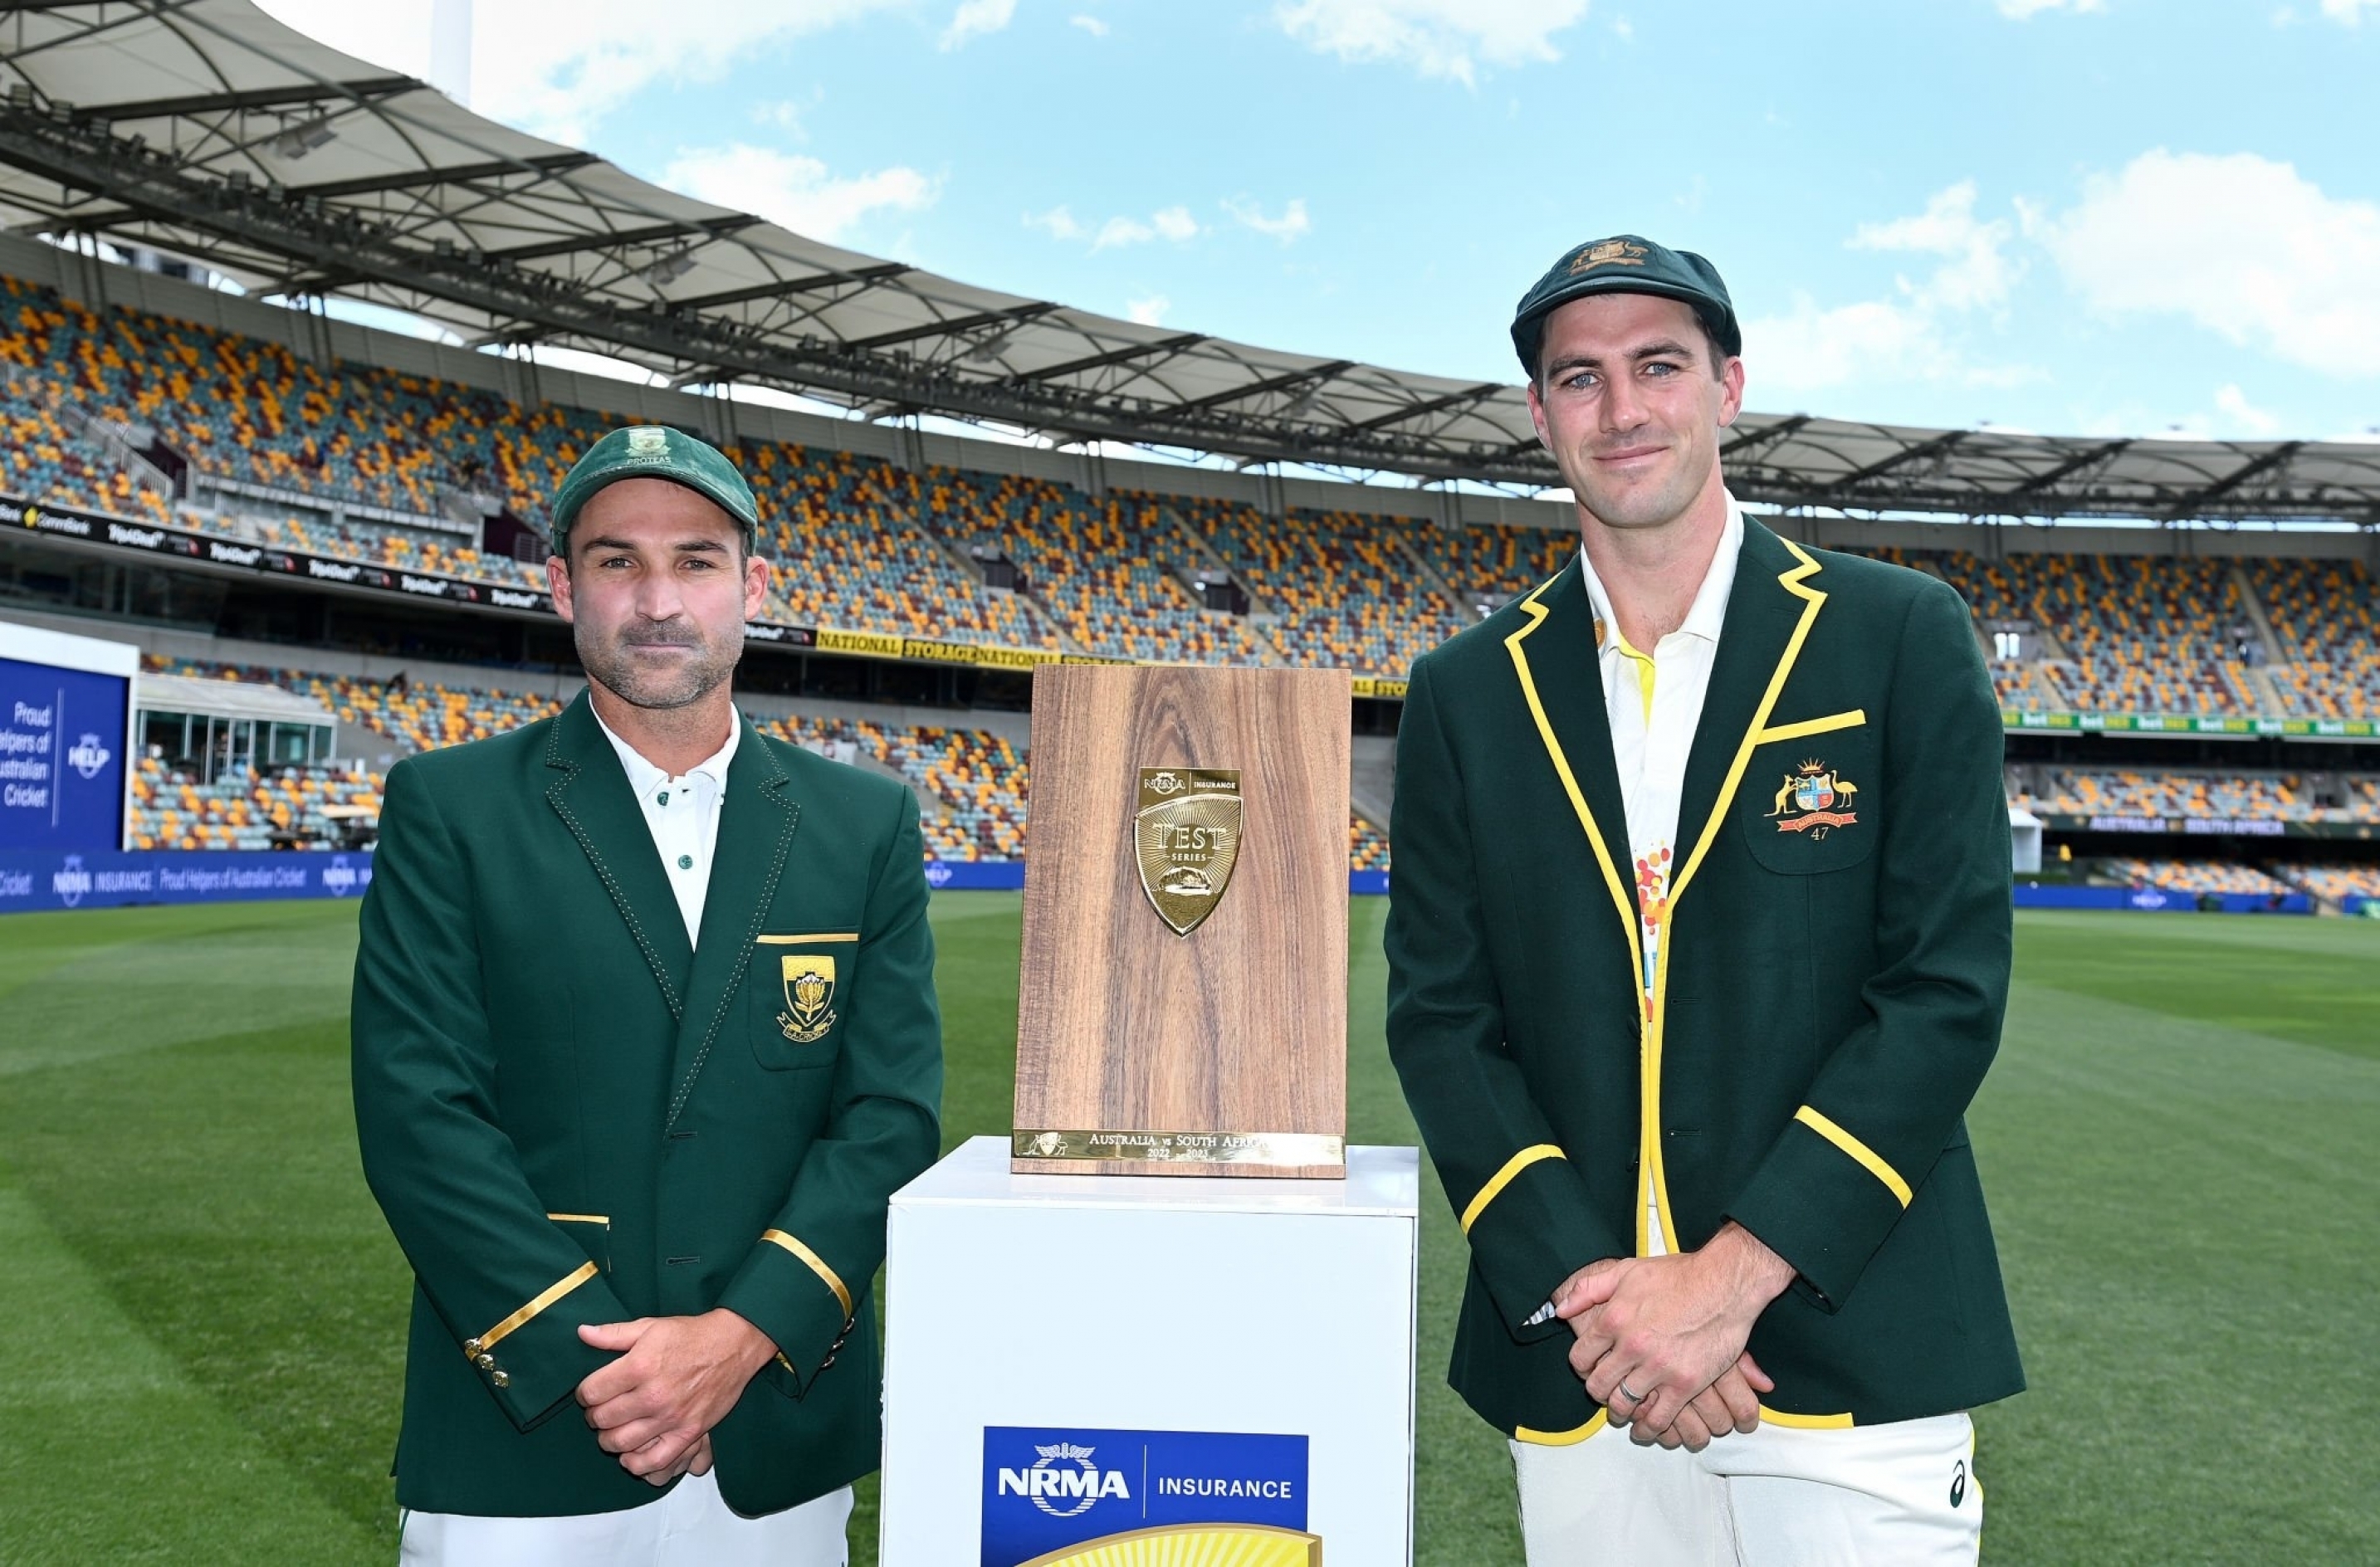 AUS SA LIVE Score: WTC Finals chase on, Australia host SouthAfrica for 1st Test at Fortress Gabba, match kicks off at 5:50 AM IST - Follow AUS vs SA LIVE Updates